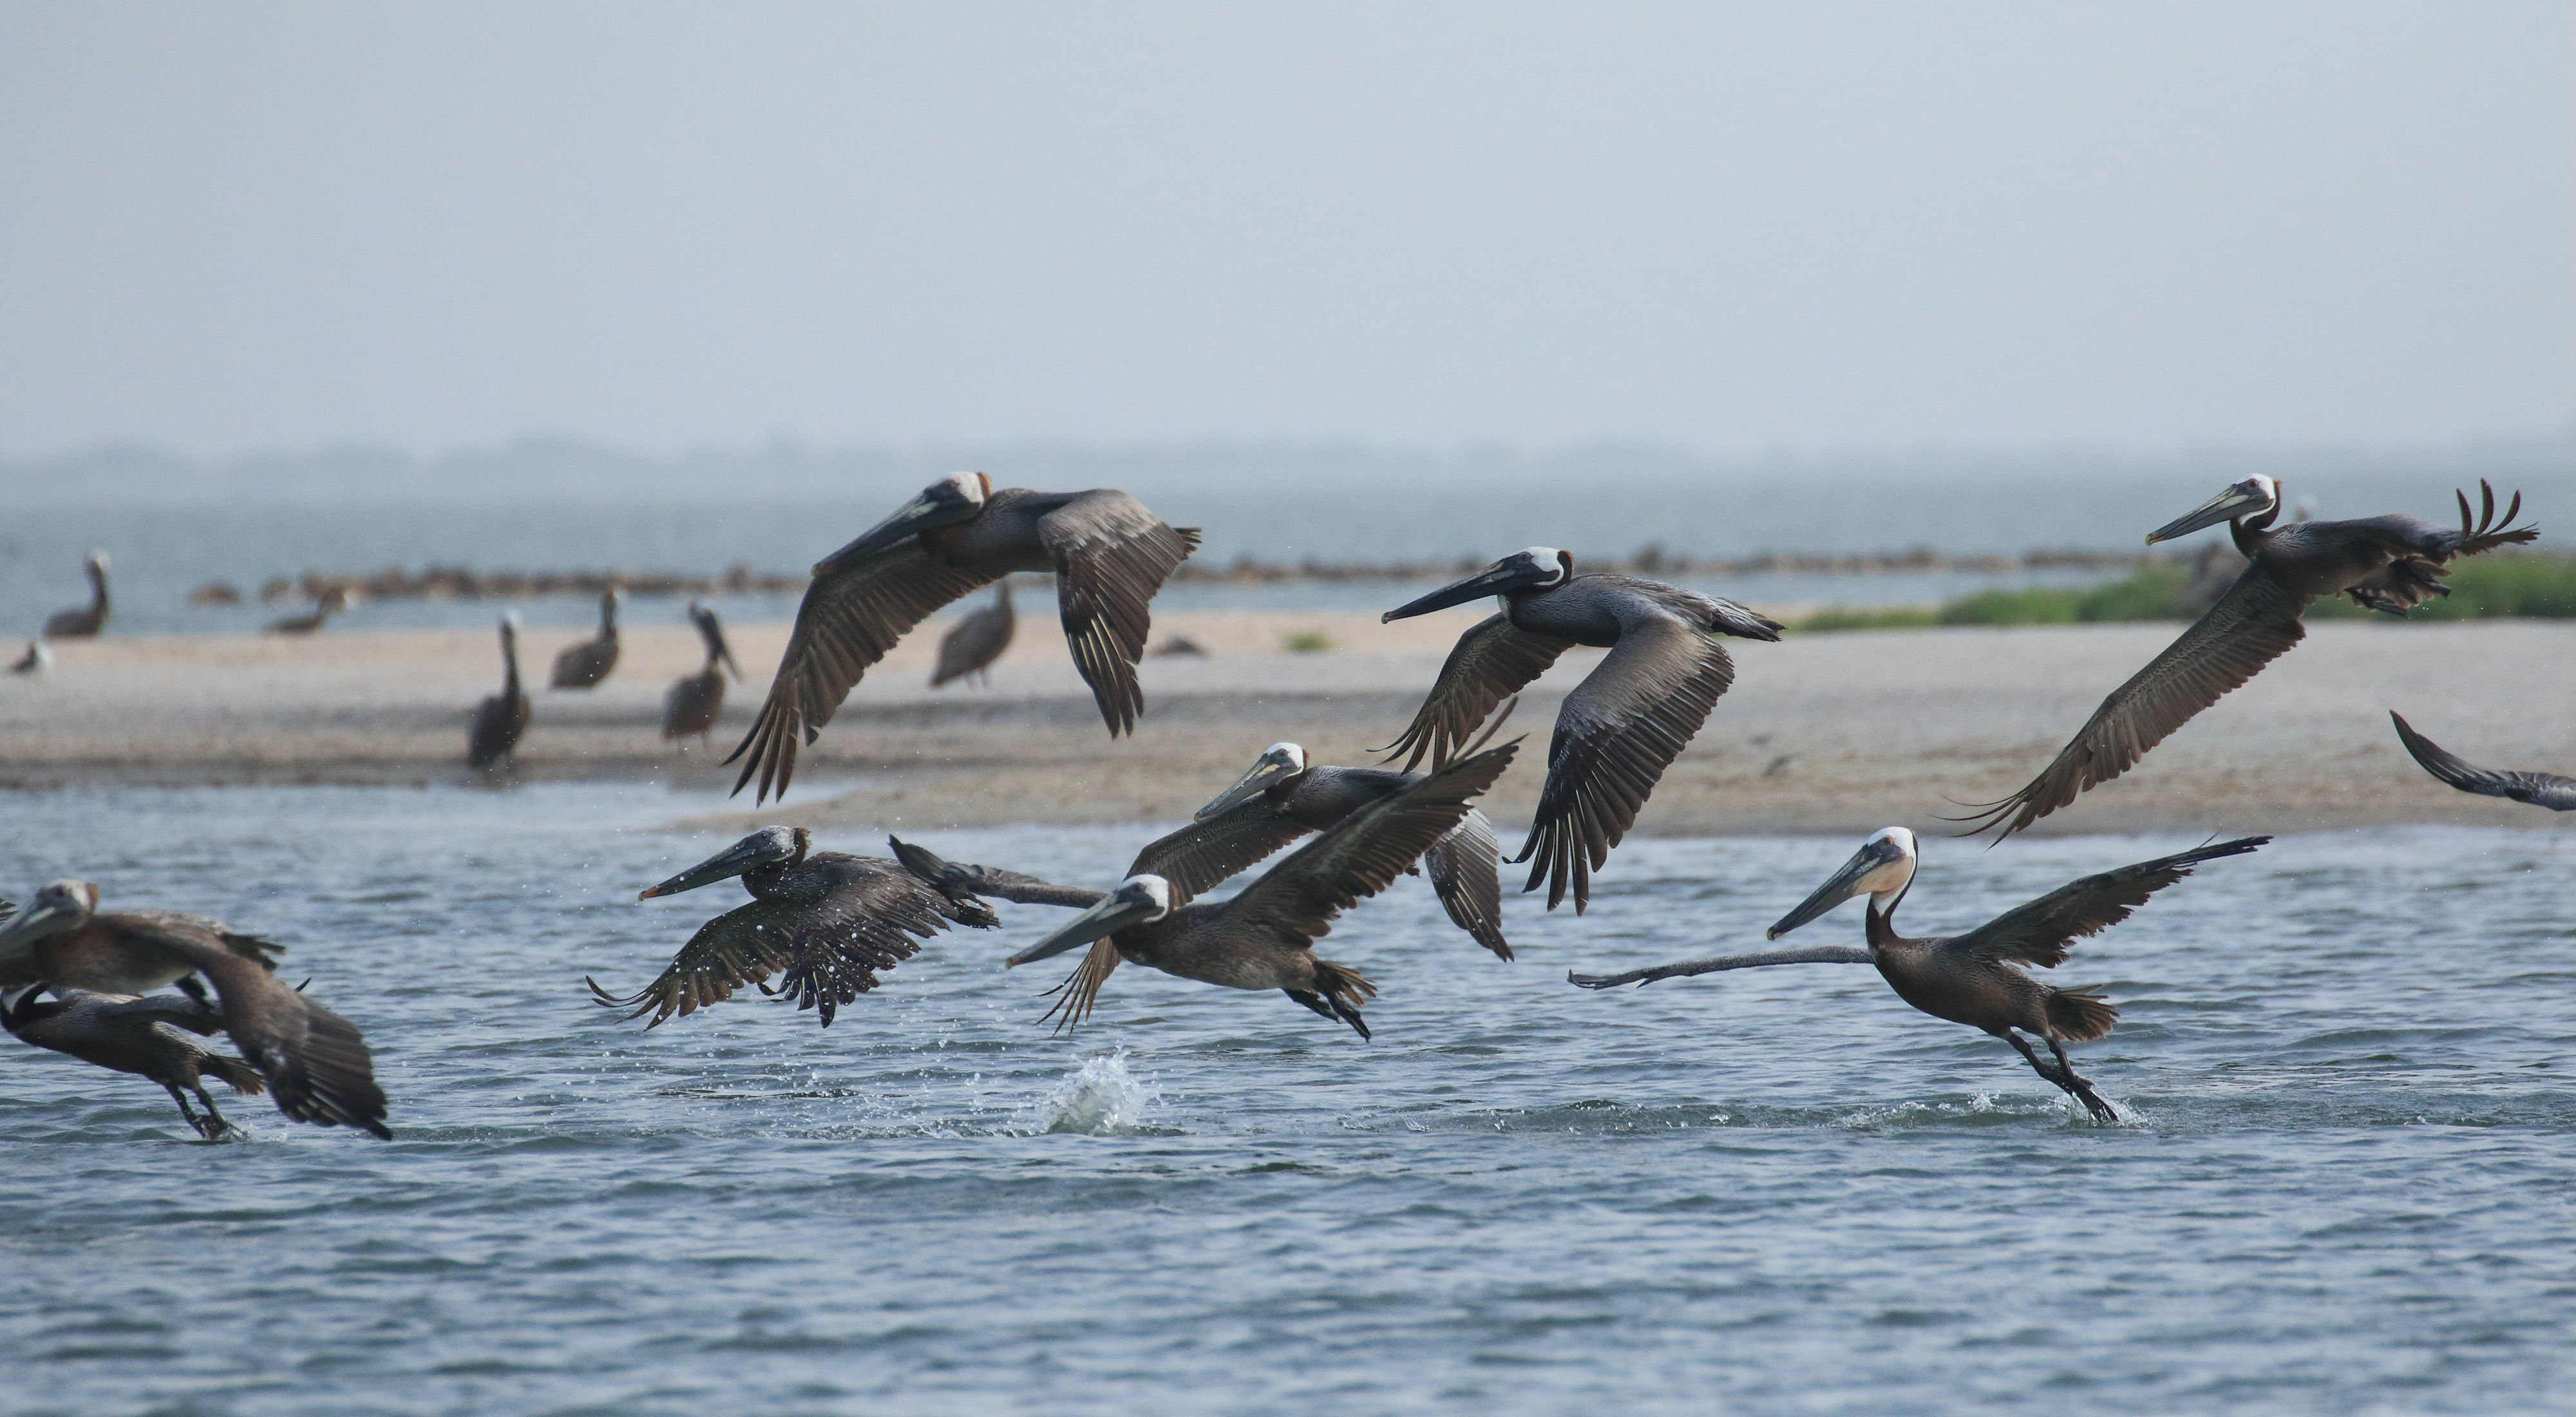 A large group of brown pelicans take flight, skimming the ocean surface.